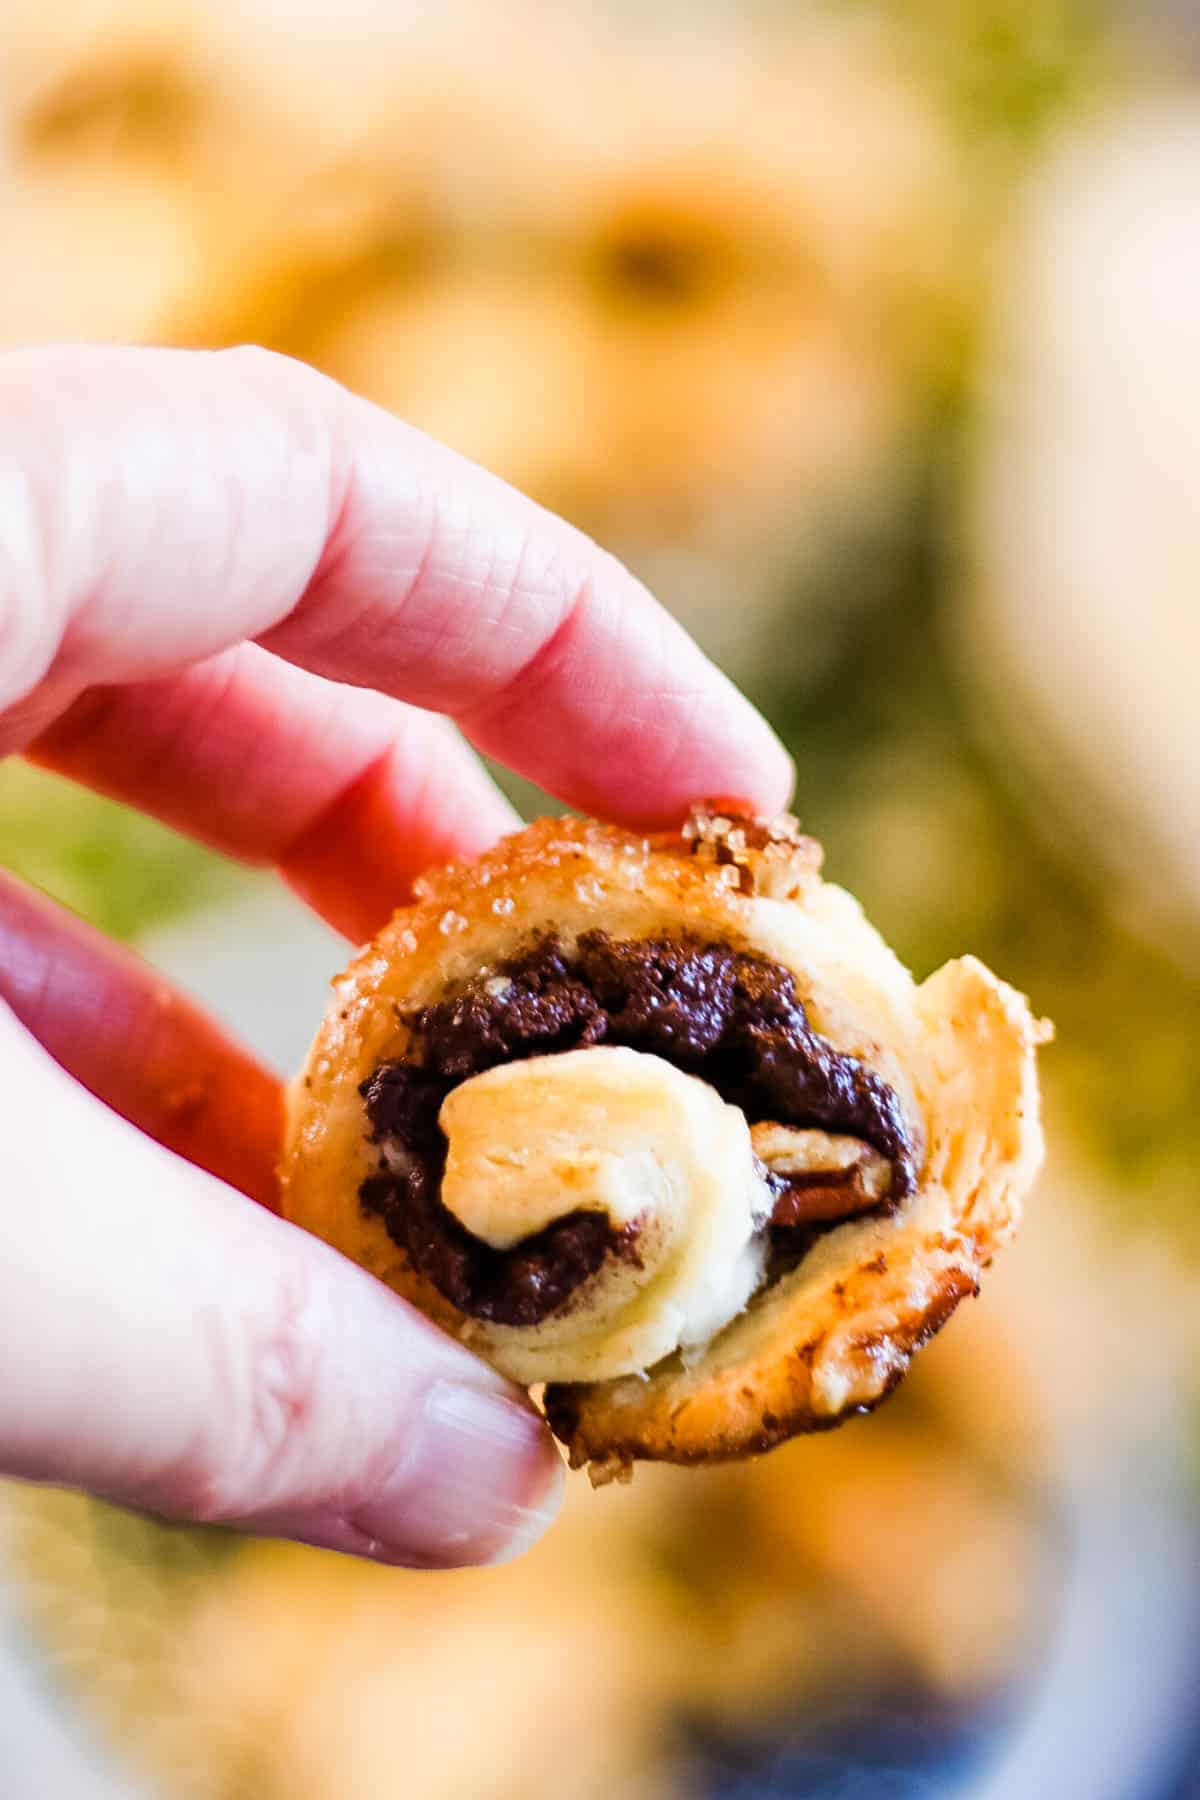 A person holding up a rugelach pastry.